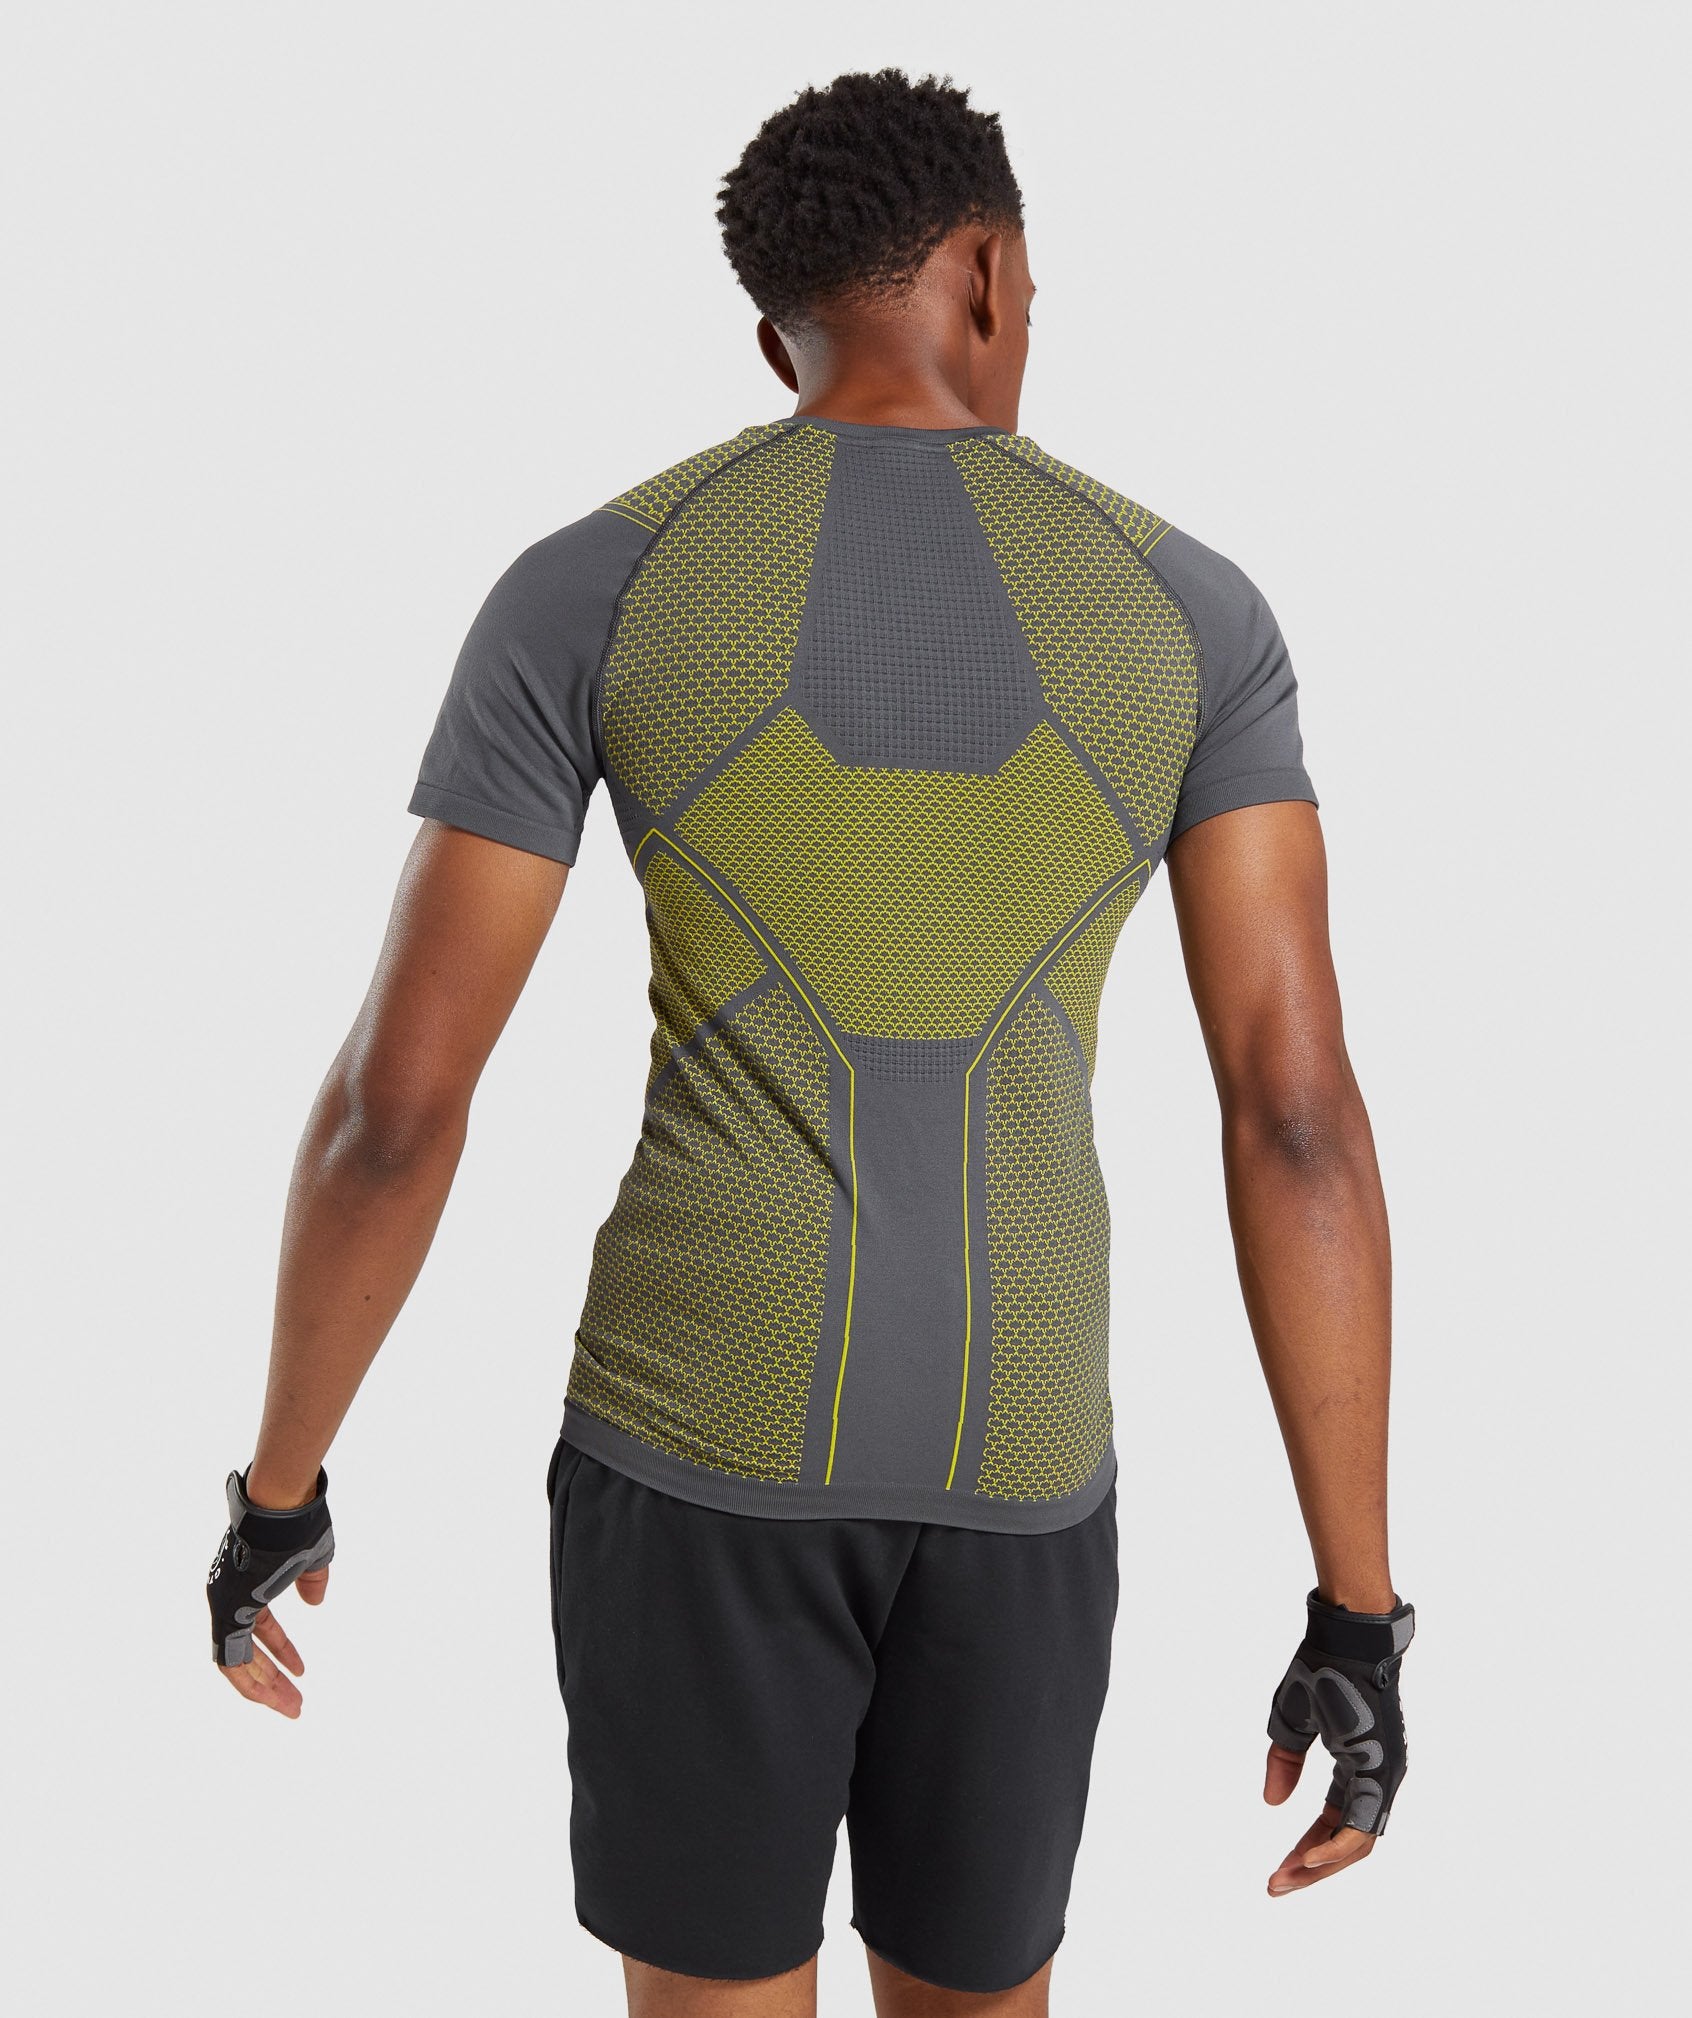 Onyx T-Shirt in Charcoal/Lime - view 3